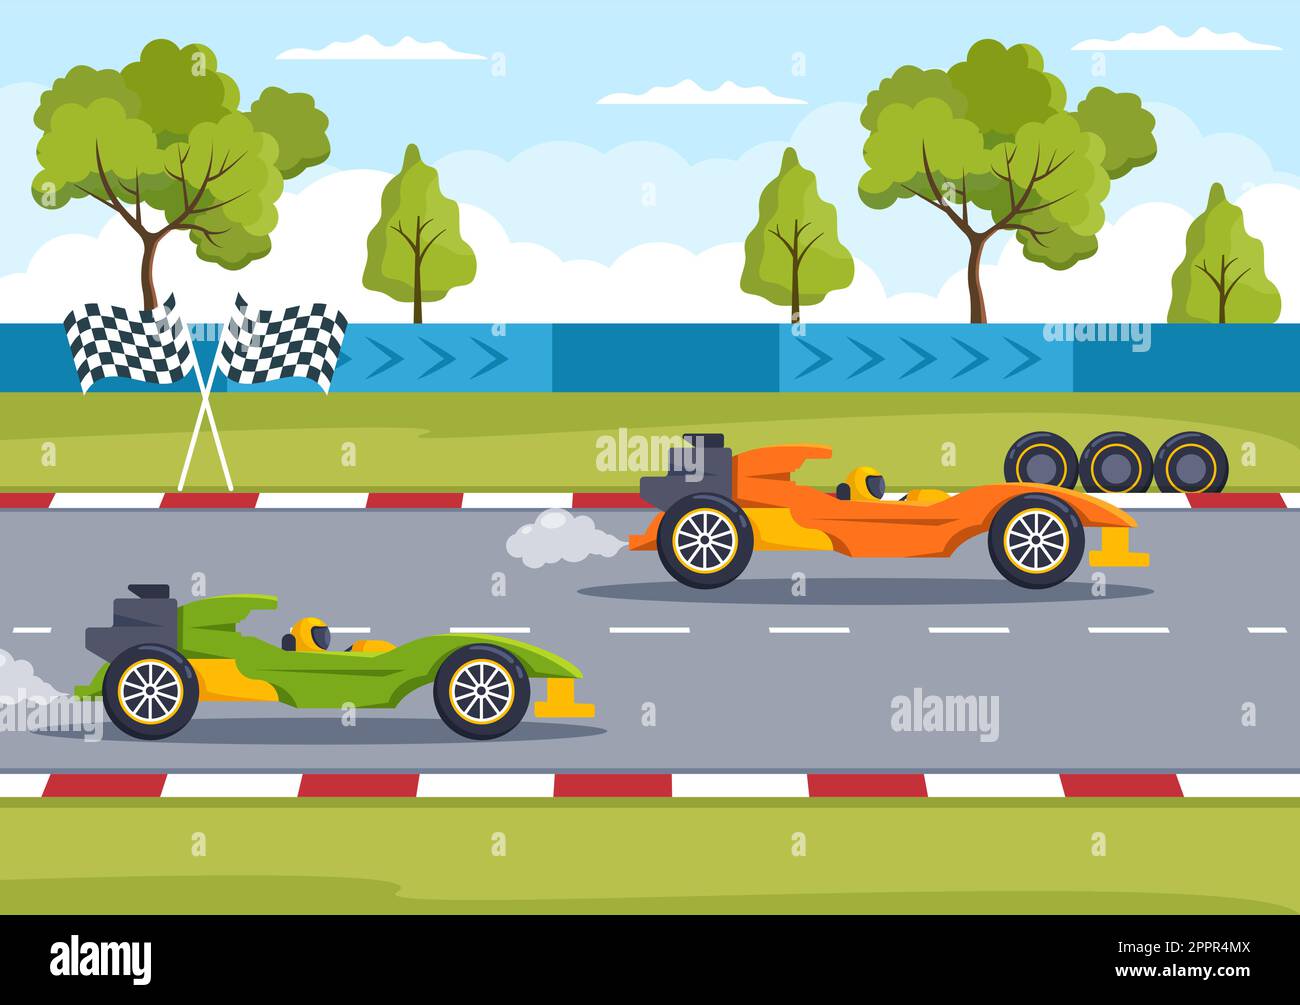 Formula Racing Sport Car Reach on Race Circuit the Finish Line Cartoon Illustration to Win the Championship in Flat Style Design Stock Vector